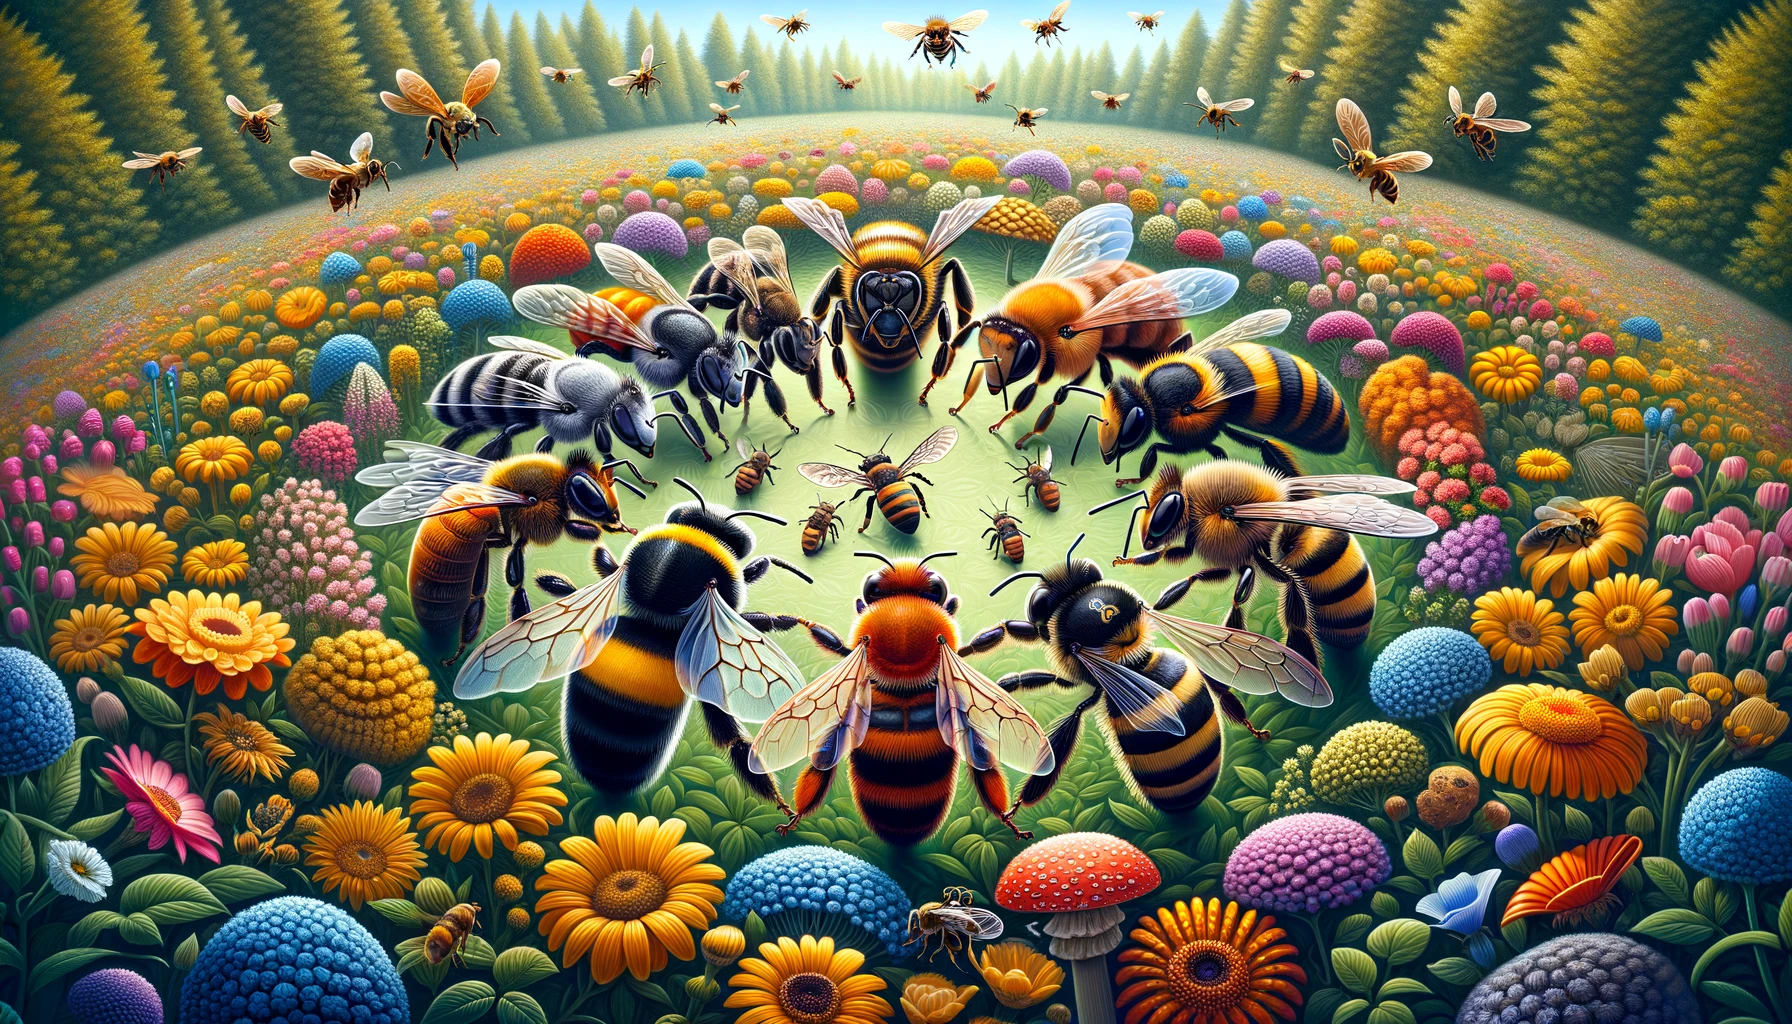 All Types Of Bees Holding Hands In Unity 